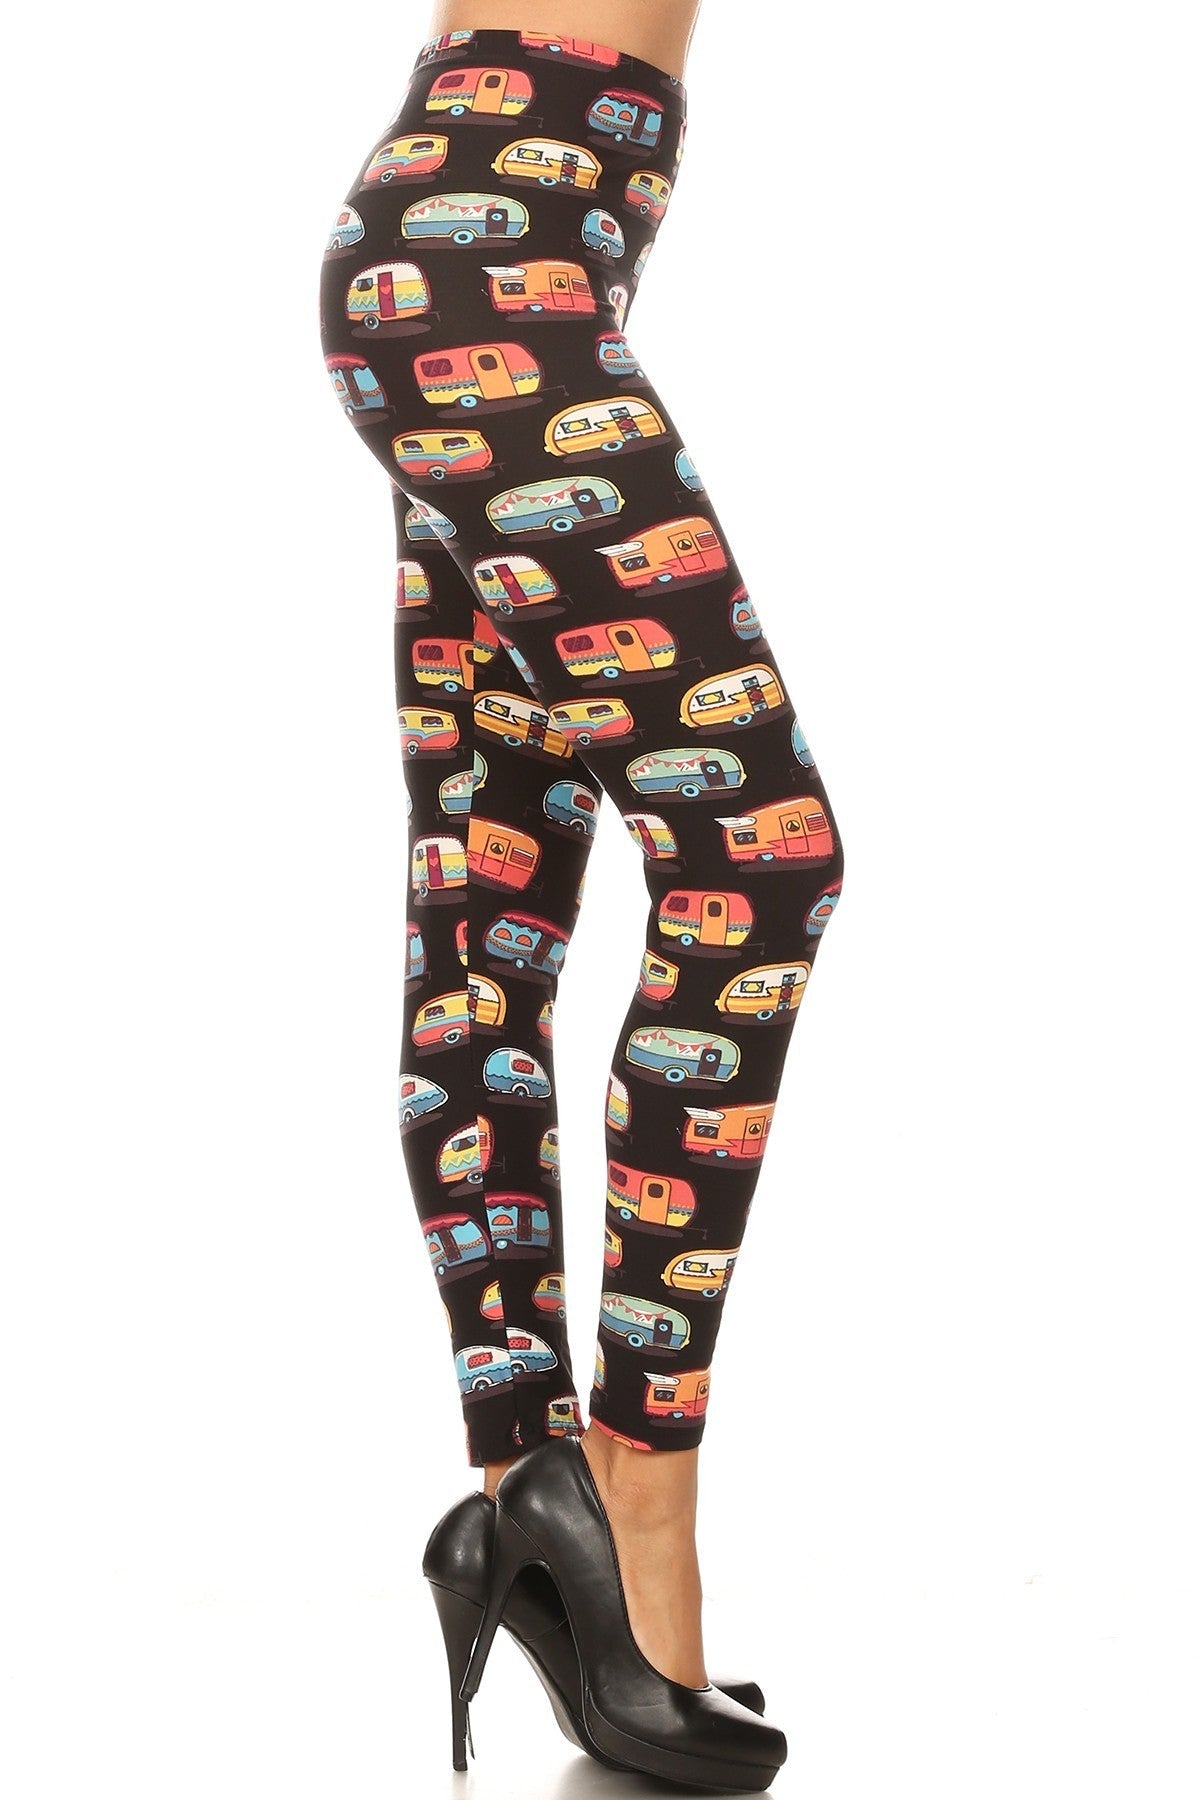 Multicolored Campers Printed, High Waisted Leggings In A Fit Style, With An Elastic Waistband Blue Zone Planet